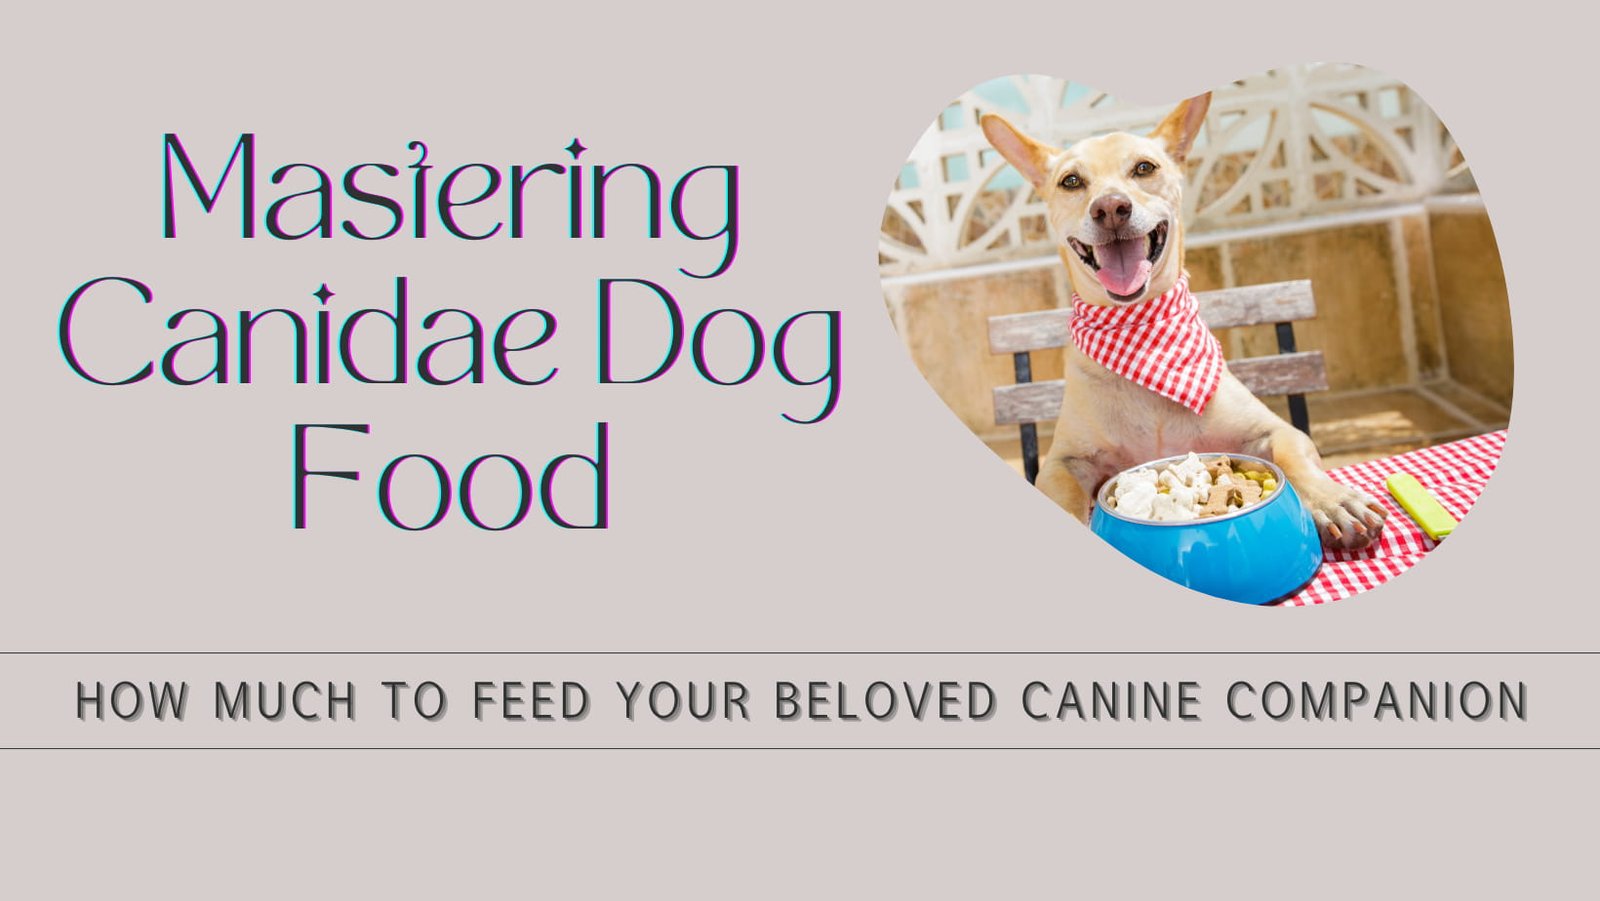 Mastering Canidae Dog Food: How Much to Feed Your Beloved Canine Companion